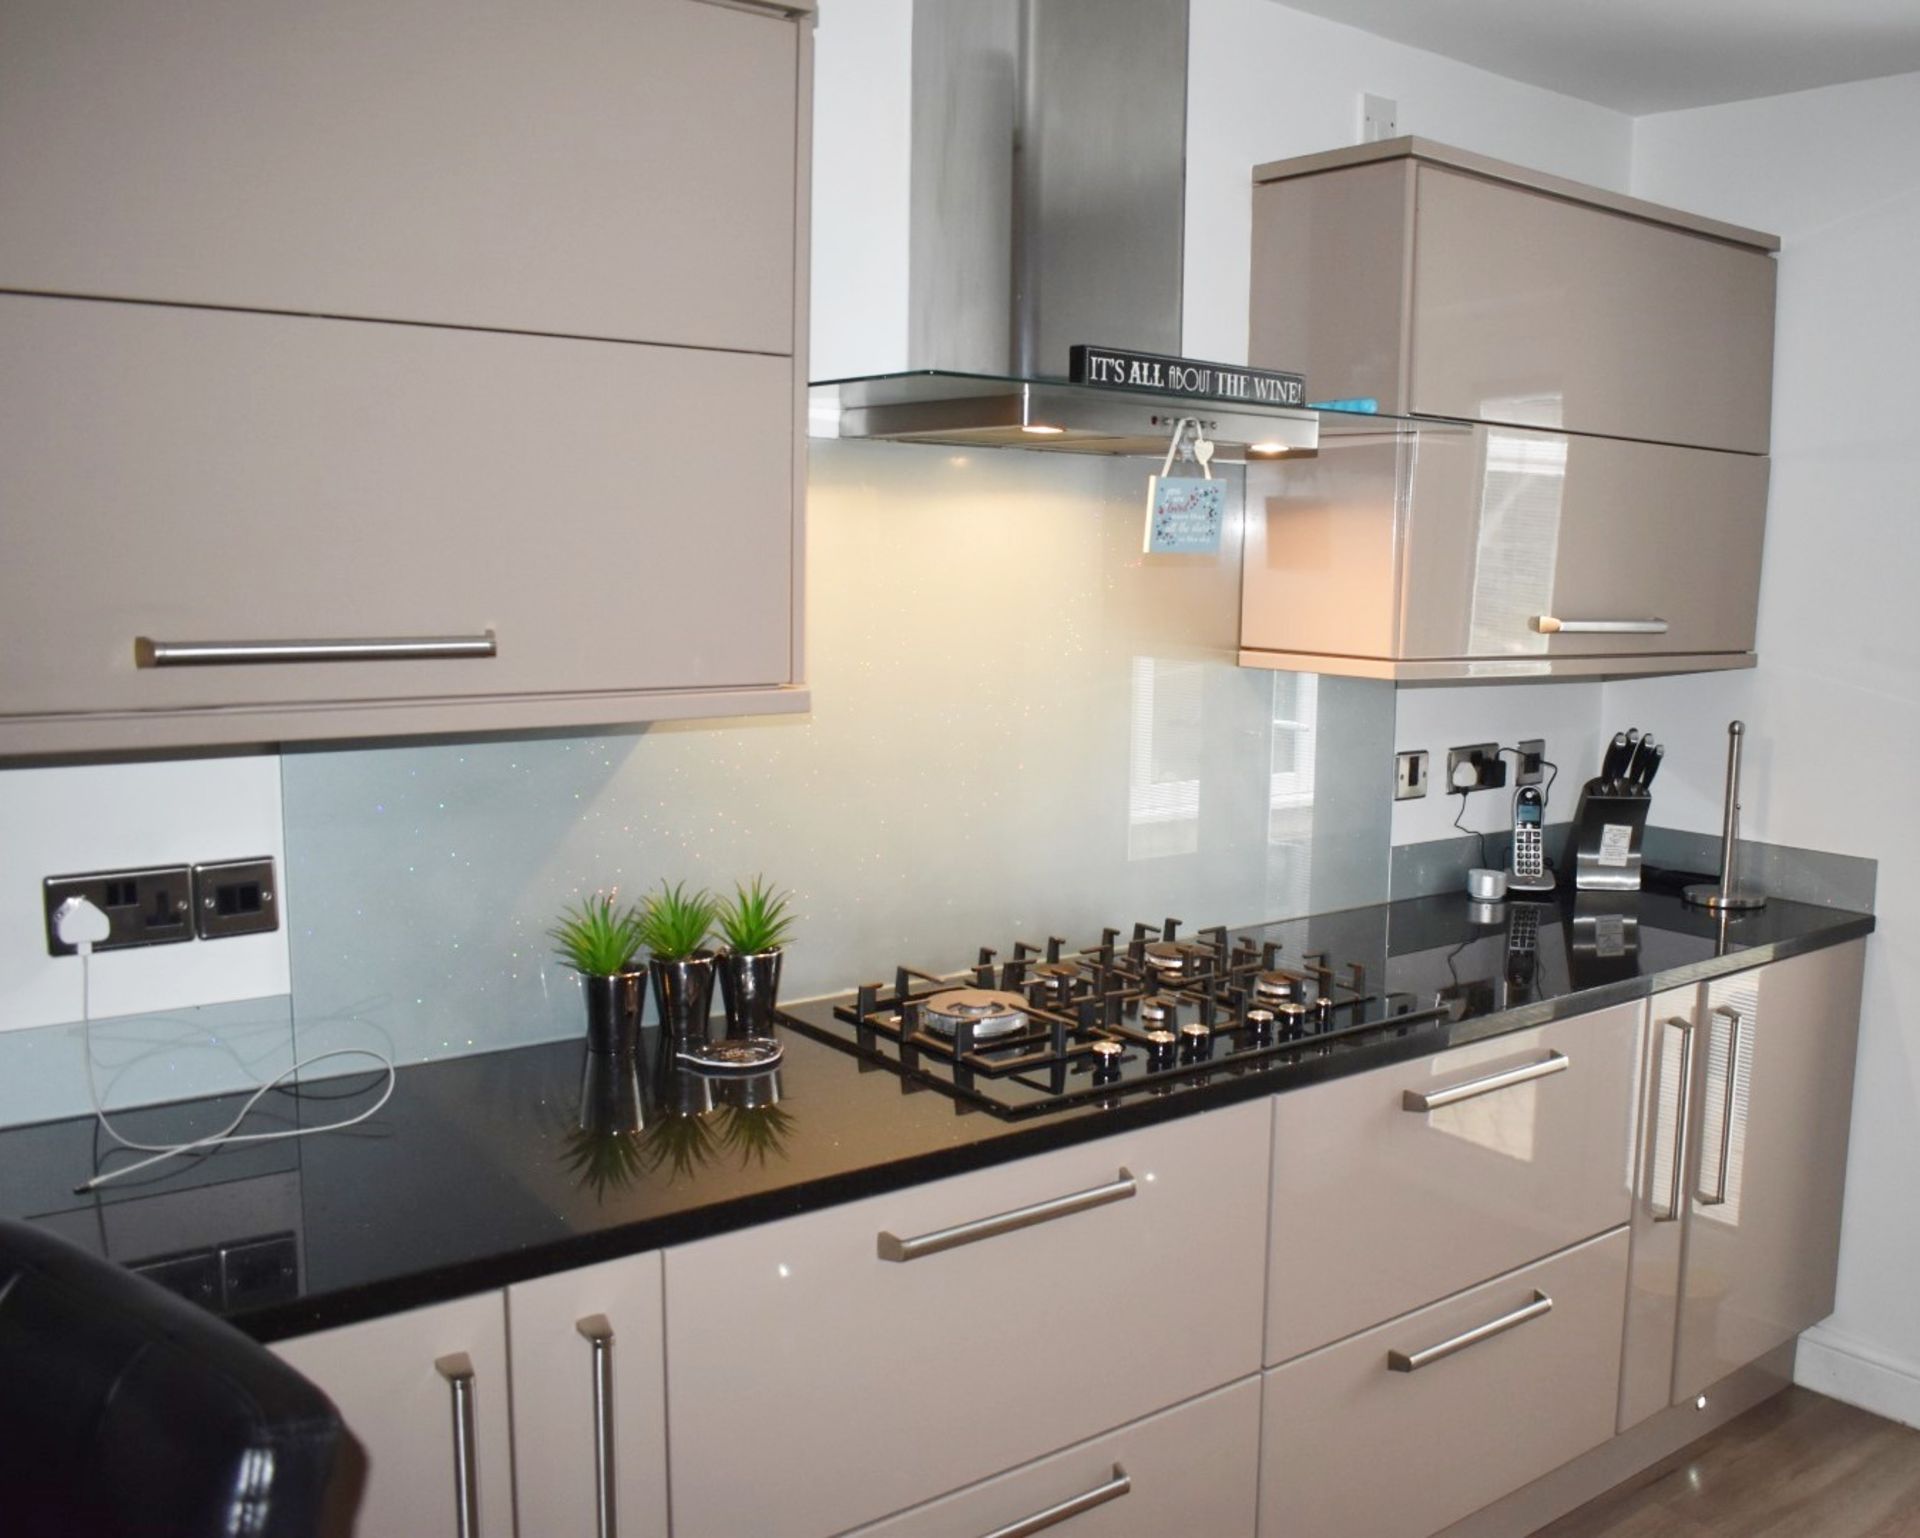 1 x Contemporary Mocha Fitted Kitchen Featuring Galaxy Granite Worktops, Breakfast Bar With Stools - Image 28 of 77